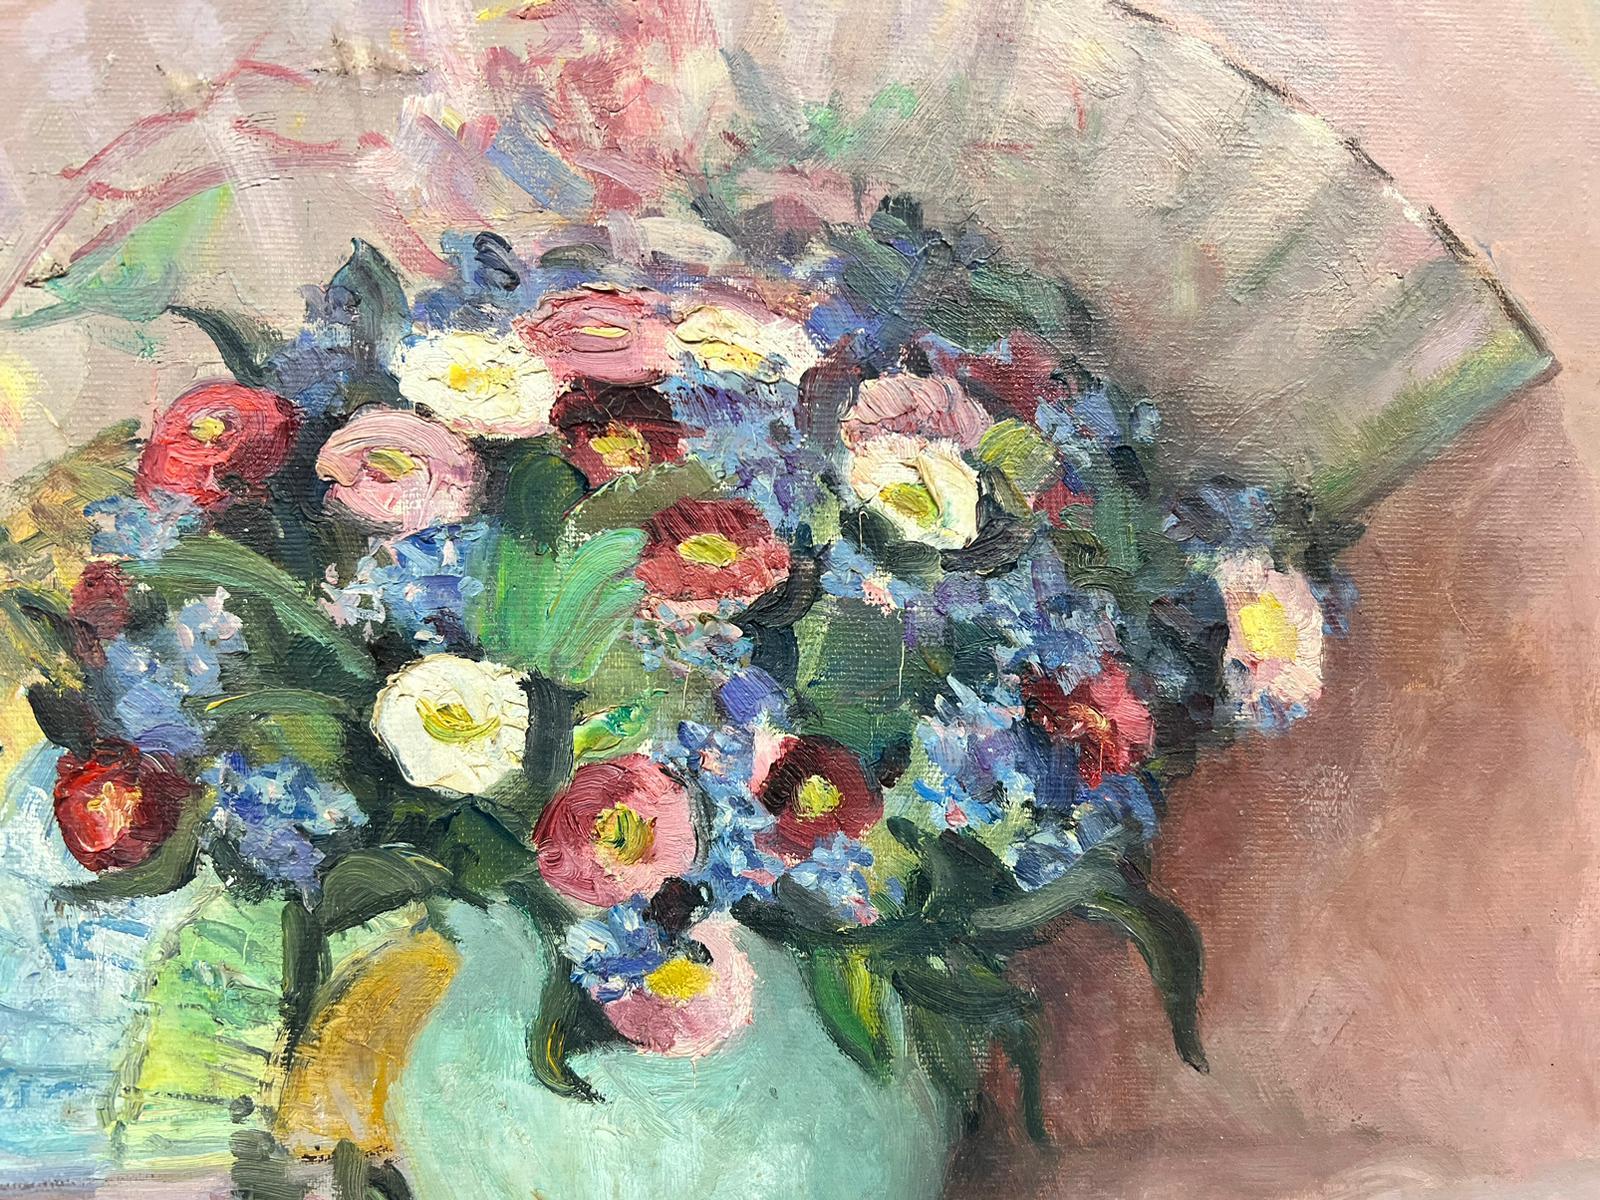 Mid 20th Century French Signed Oil Beautiful Flowers in Teal Vase Pink Back - Post-Impressionist Painting by 20th Century French School